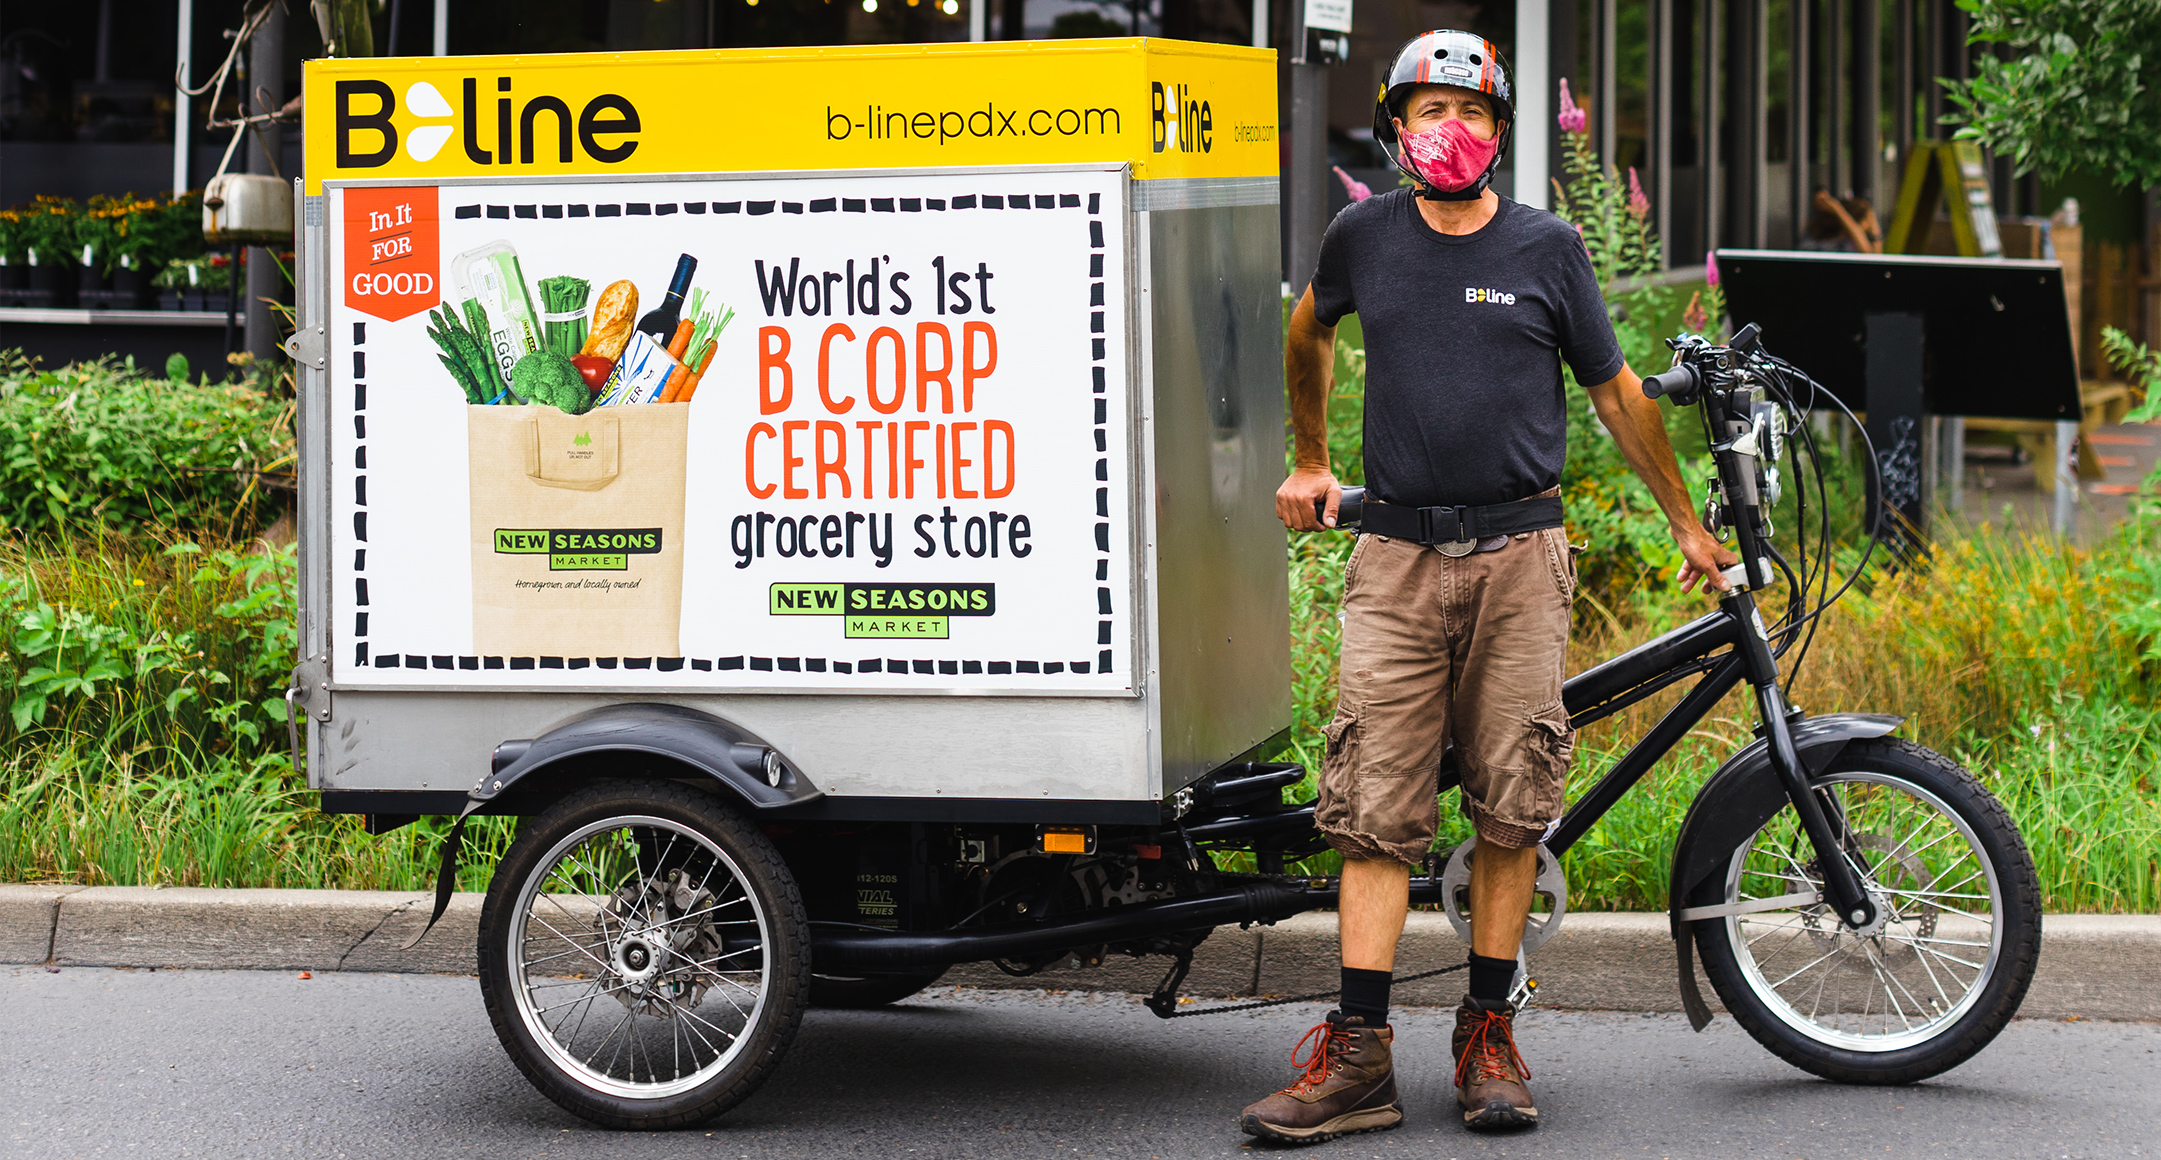 A B-Line Urban Delivery worker poses with their trike and truck.